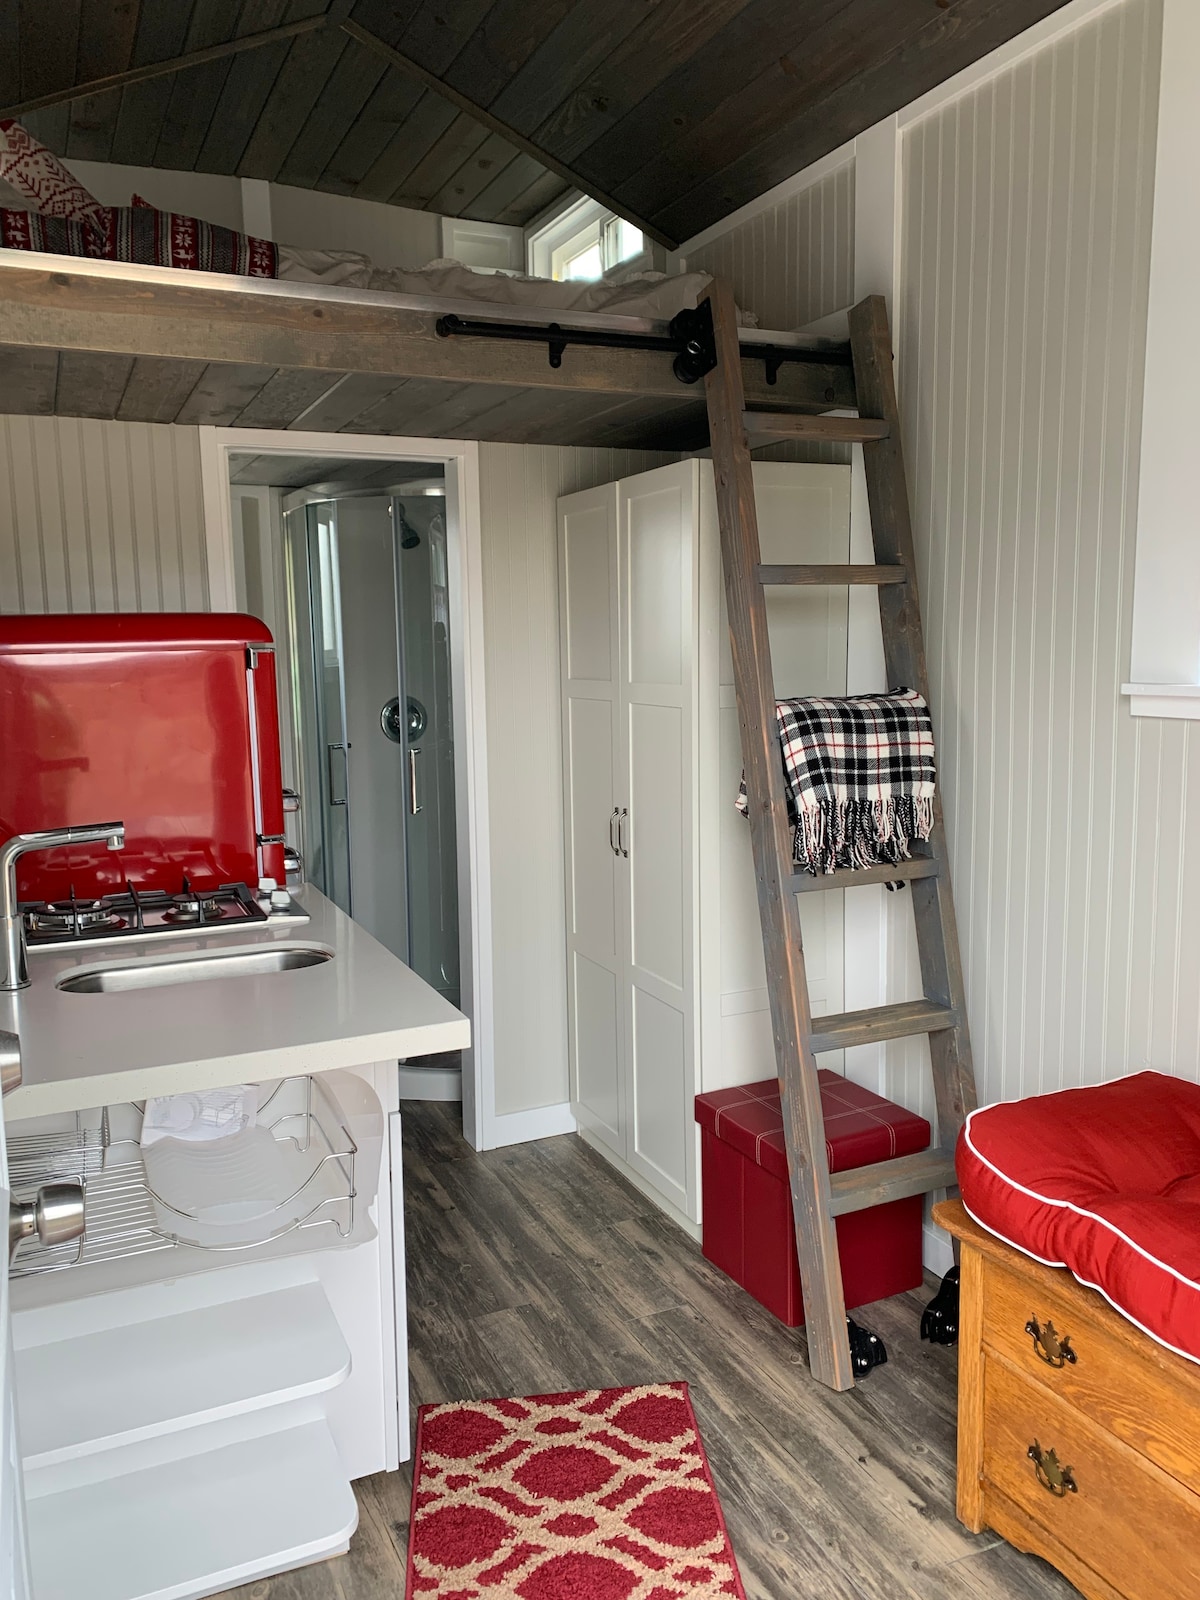 Beulah, CO  Tiny House - Better Than Tent?